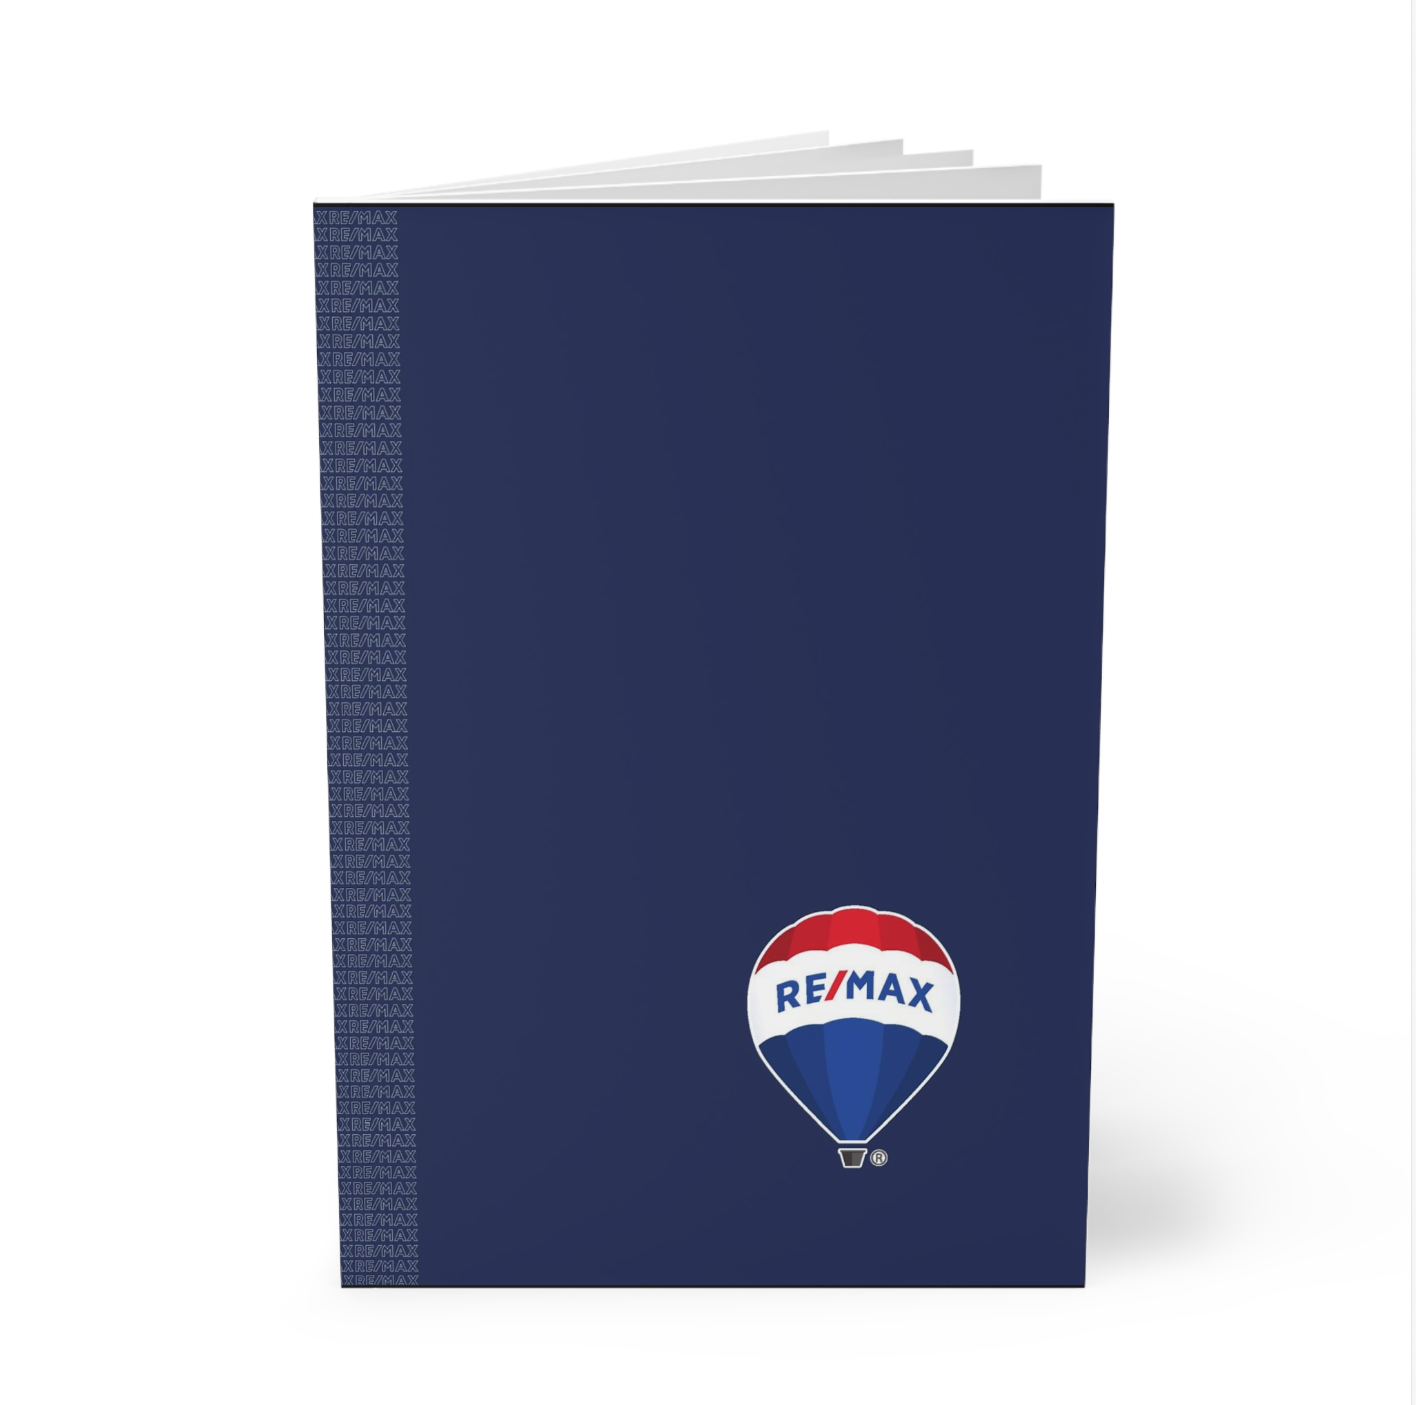 RE/MAX Full Color SoftCover Binders Blue Monogram (from as low as $6.18 per cover)